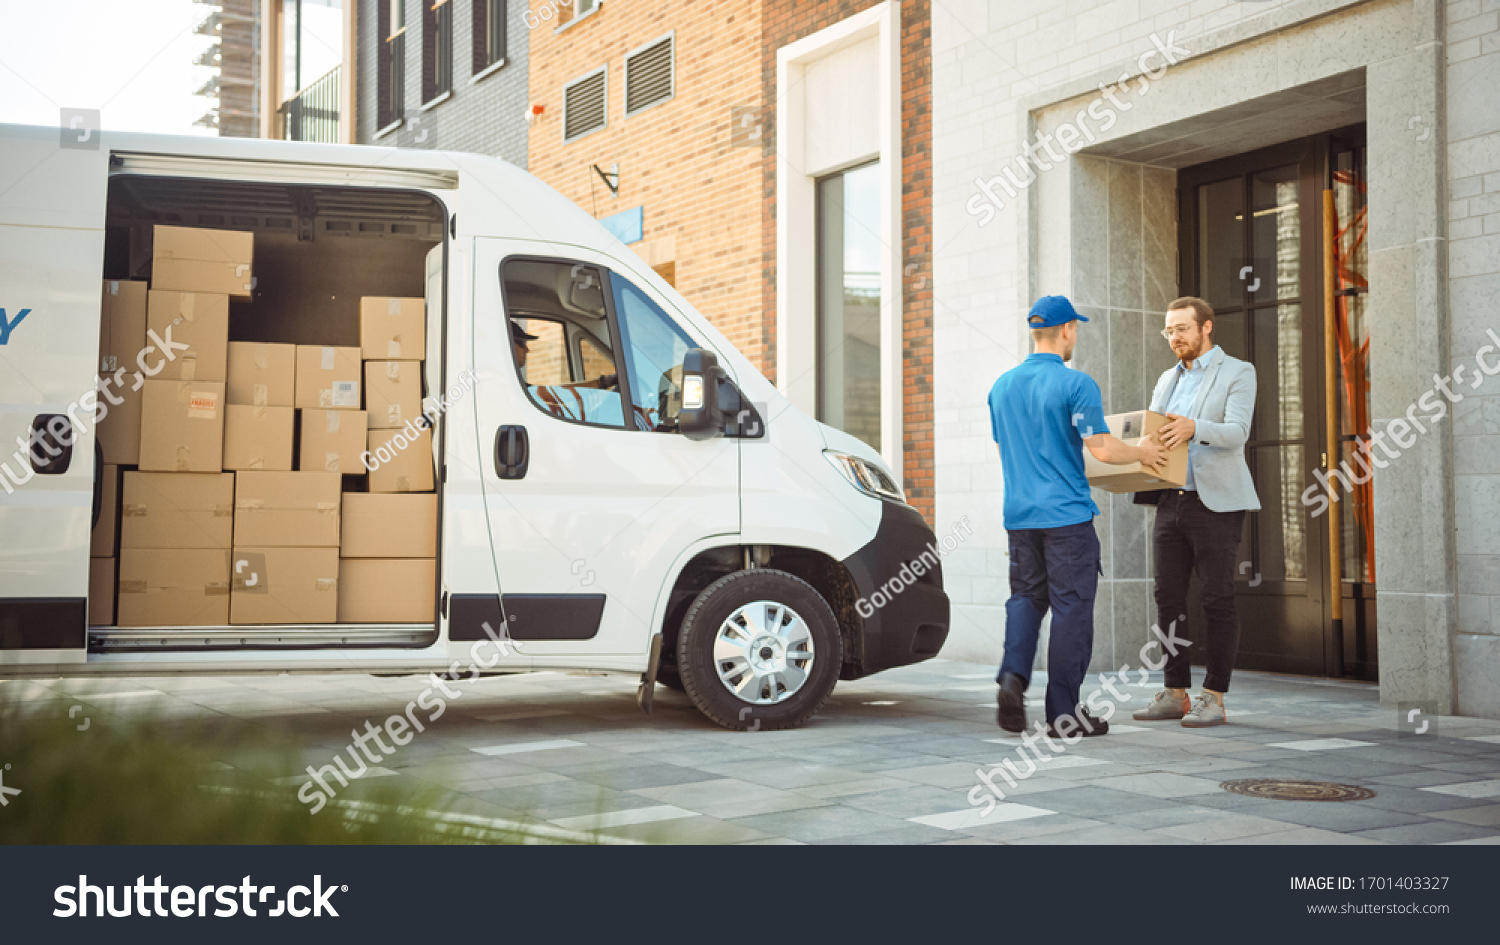 Delivery Man Gives Postal Package to a Business Customer, Who Signs Electronic Signature POD Device. In Stylish Modern Urban Office Area Courier Delivers Cardboard Box Parcel to a Man. #1701403327